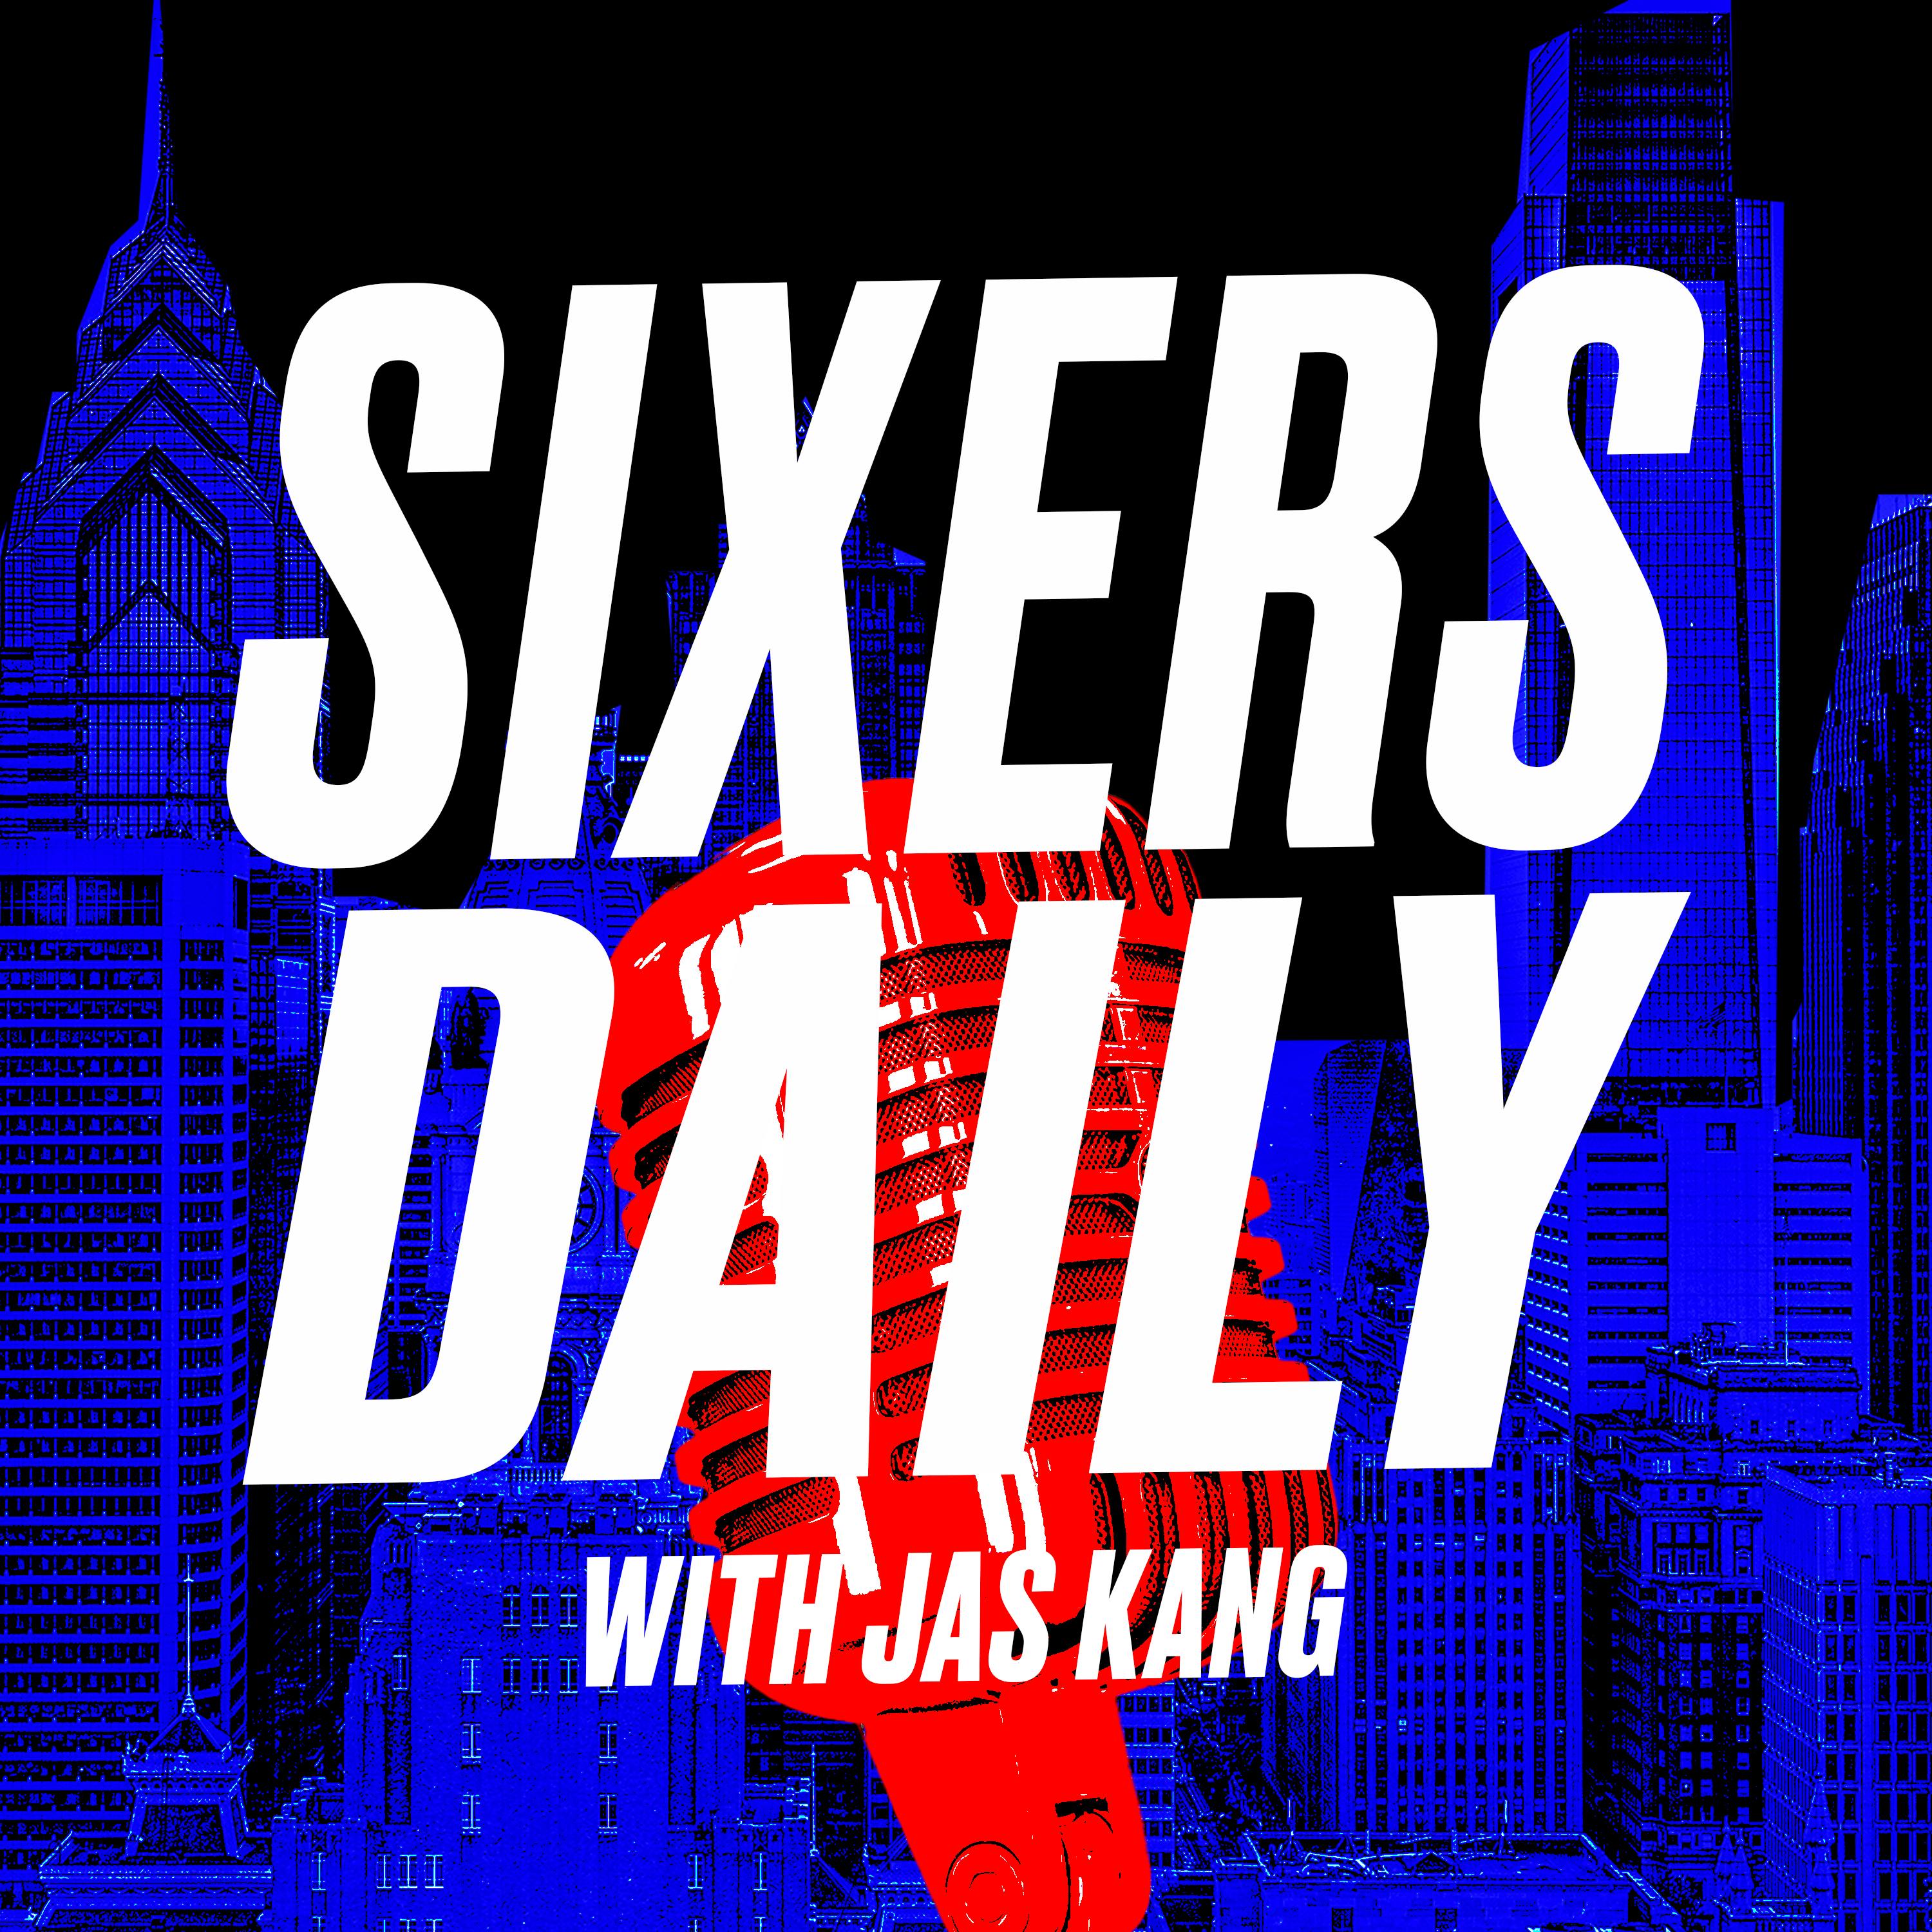 Sixers Daily with Jas Kang (Part 1) - SB Nation's Ricky O'Donnell on Sixers' offseason, Tobias Harris trade potential and ideal prospects with the No. 23 pick